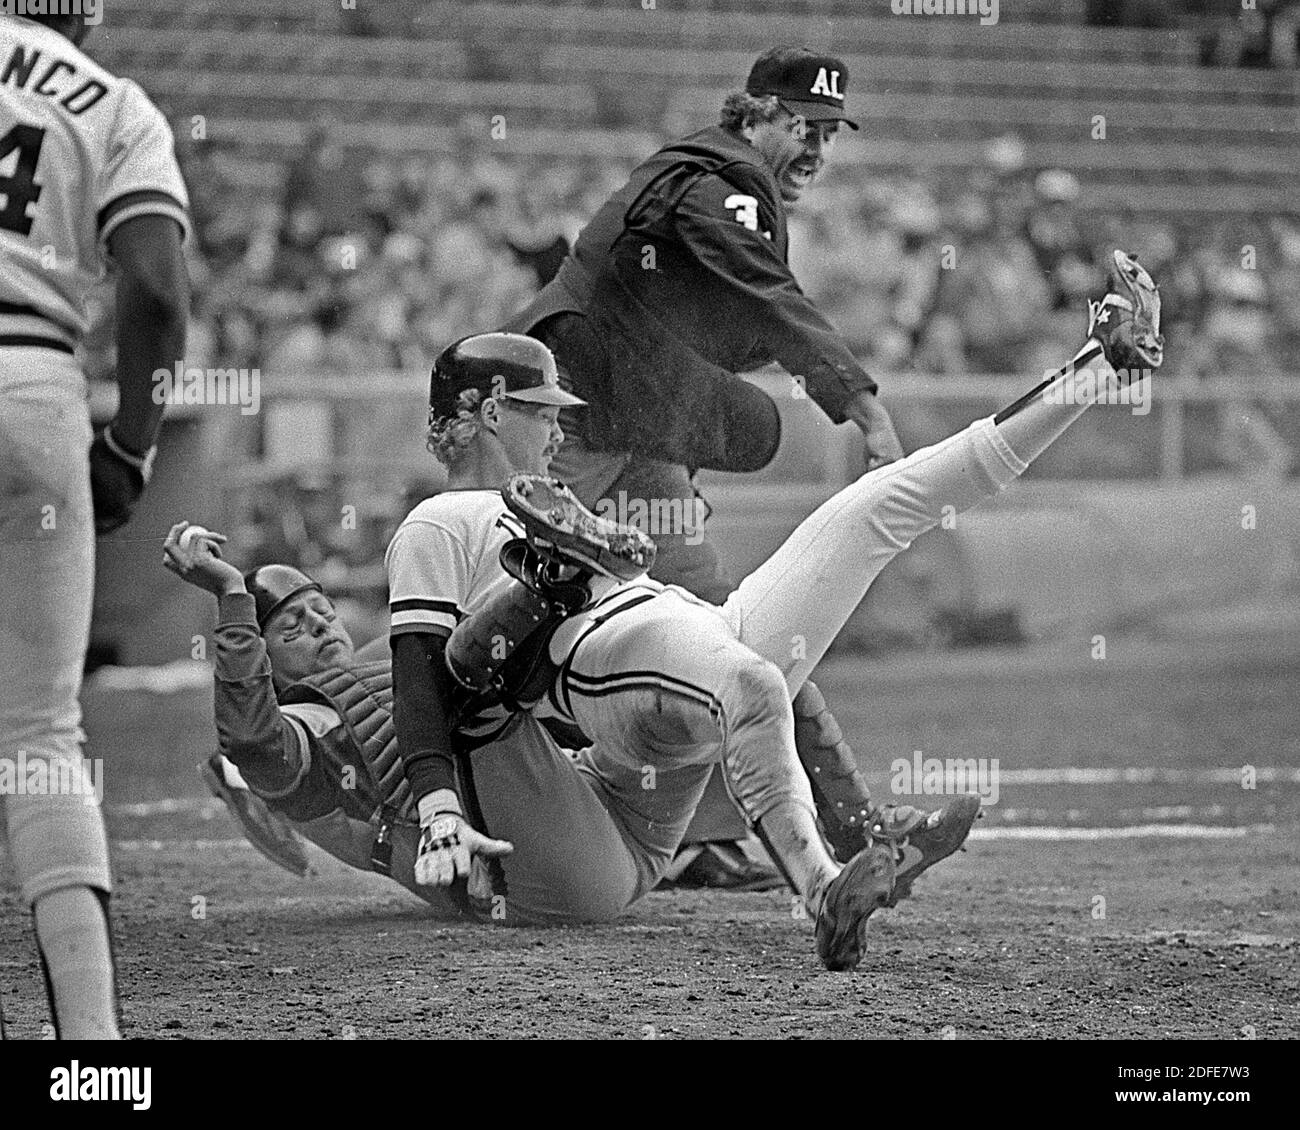 Chicago White Sox catcher Carlton Fisk holds onto the ball during